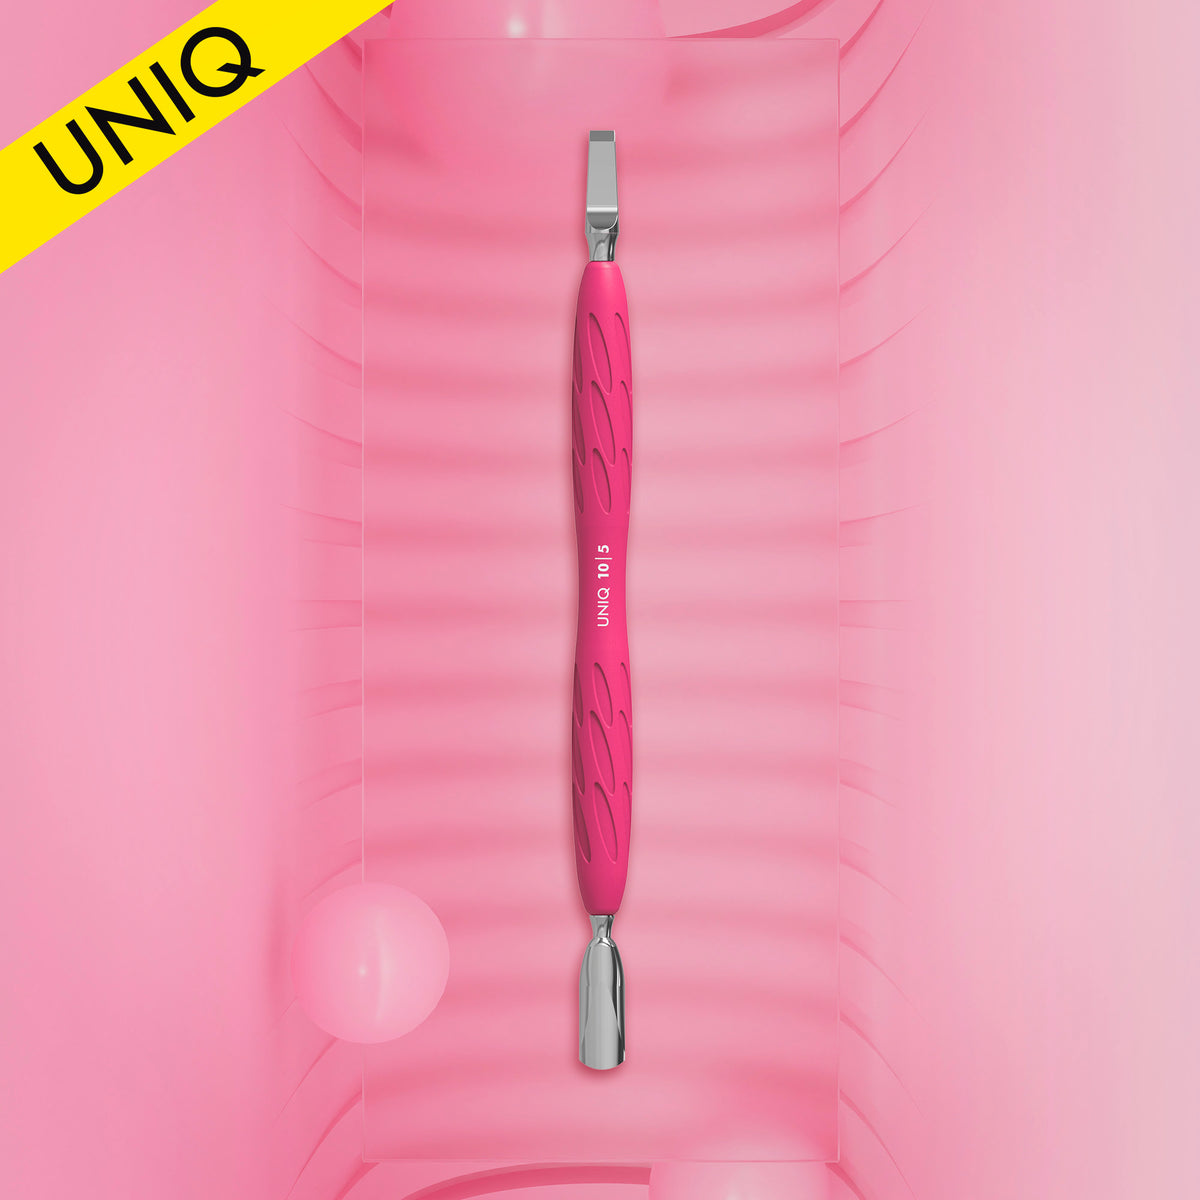 Manicure pusher with silicone handle "Gummy" UNIQ 10 TYPE 5 (narrow rounded pusher + wide blade)